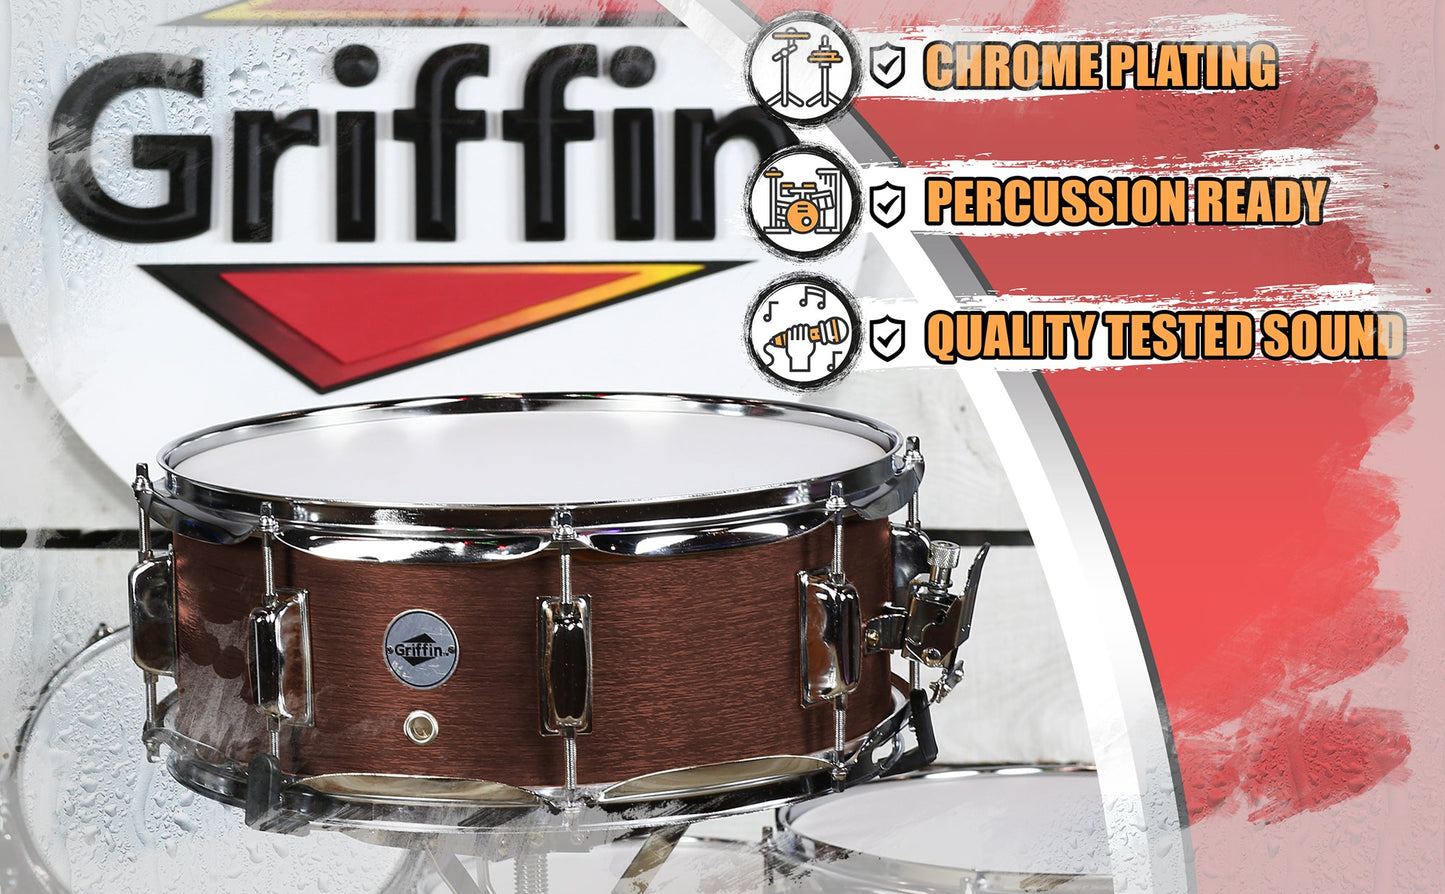 GRIFFIN Snare Drum - Poplar Wood Shell 14" x 5.5" with Flat Hickory PVC - 8 Metal Tuning Lugs & Snare Strainer Throw Off - Percussion Instrument Kit